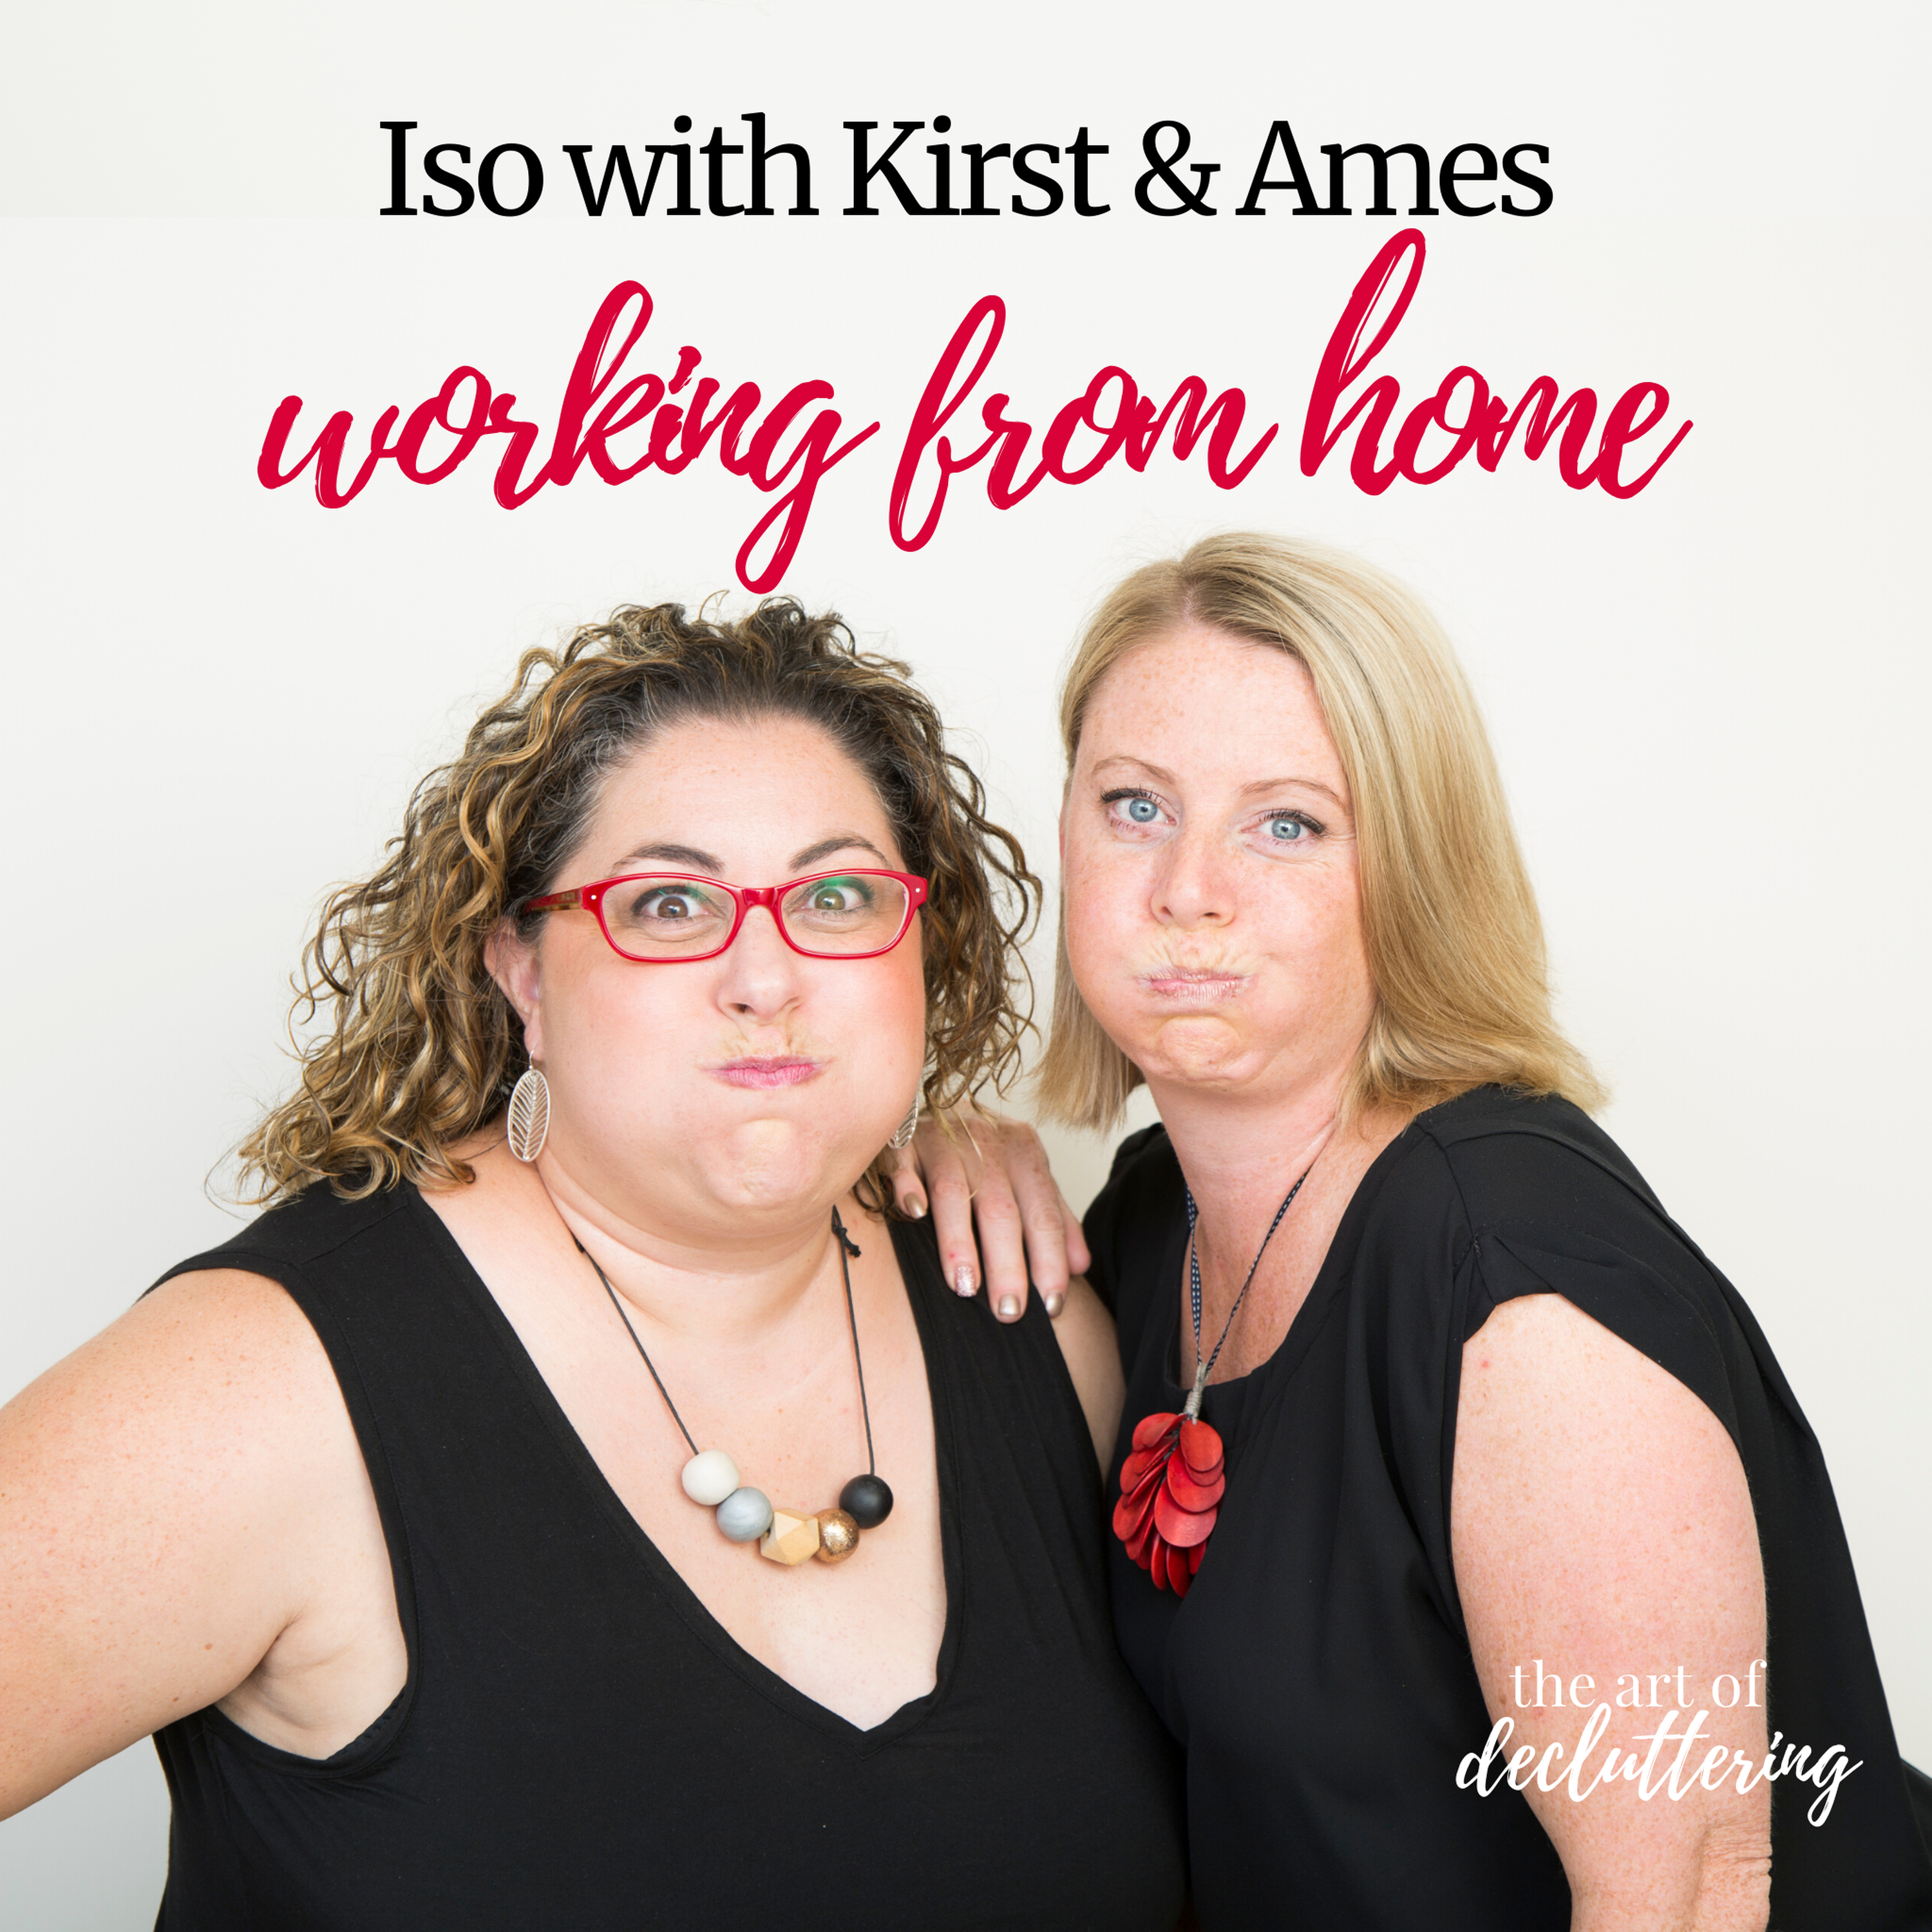 Iso with Kirst & Ames - Working from home